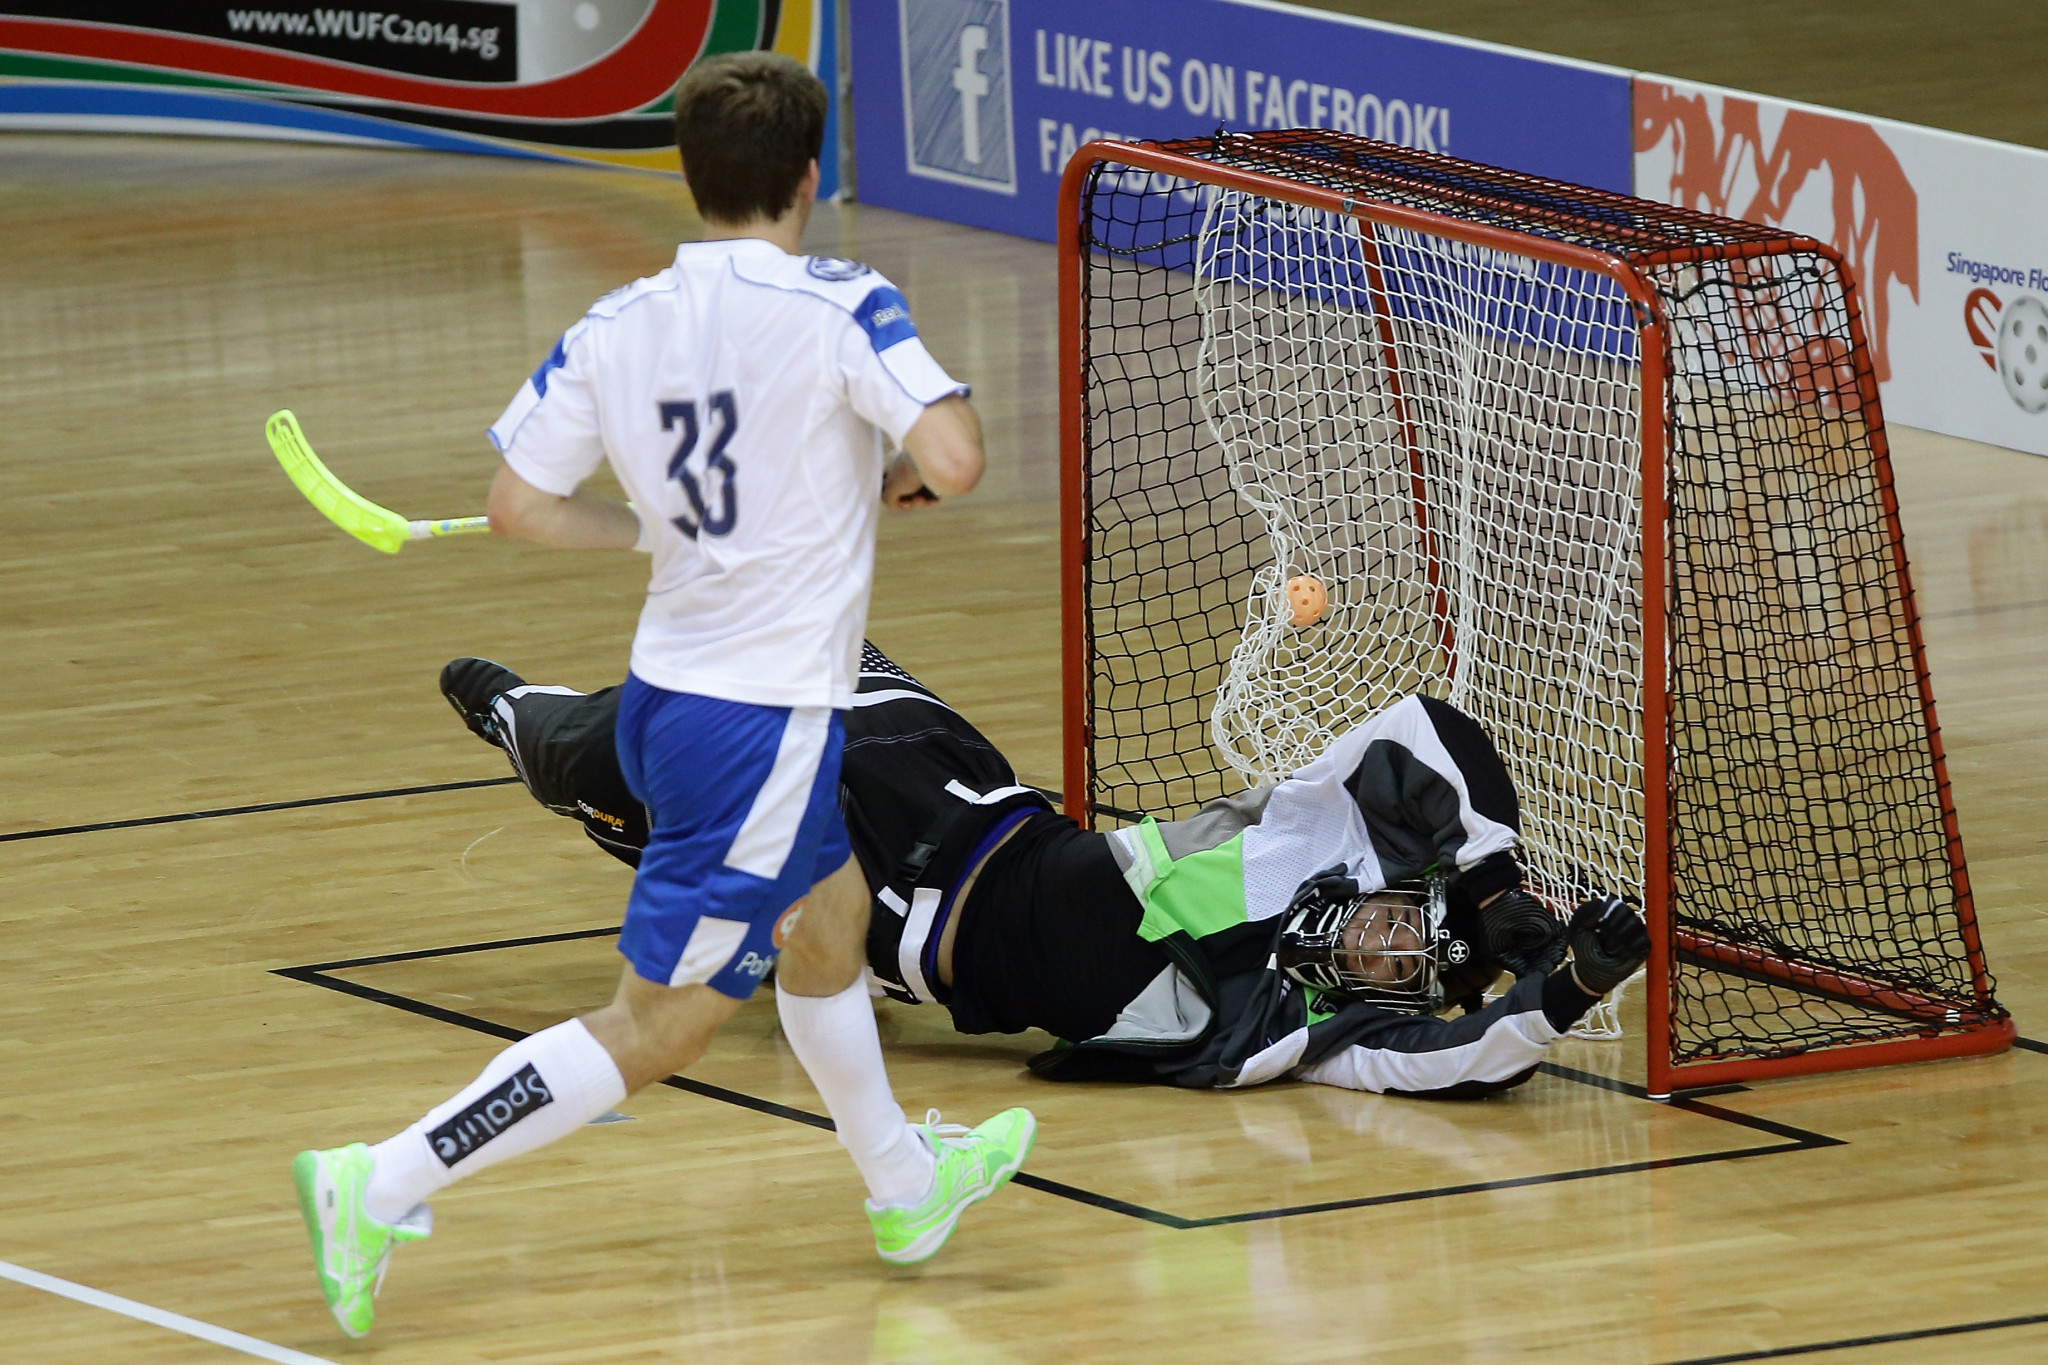 IFF secretary general hopes World Games will boost floorball in United States